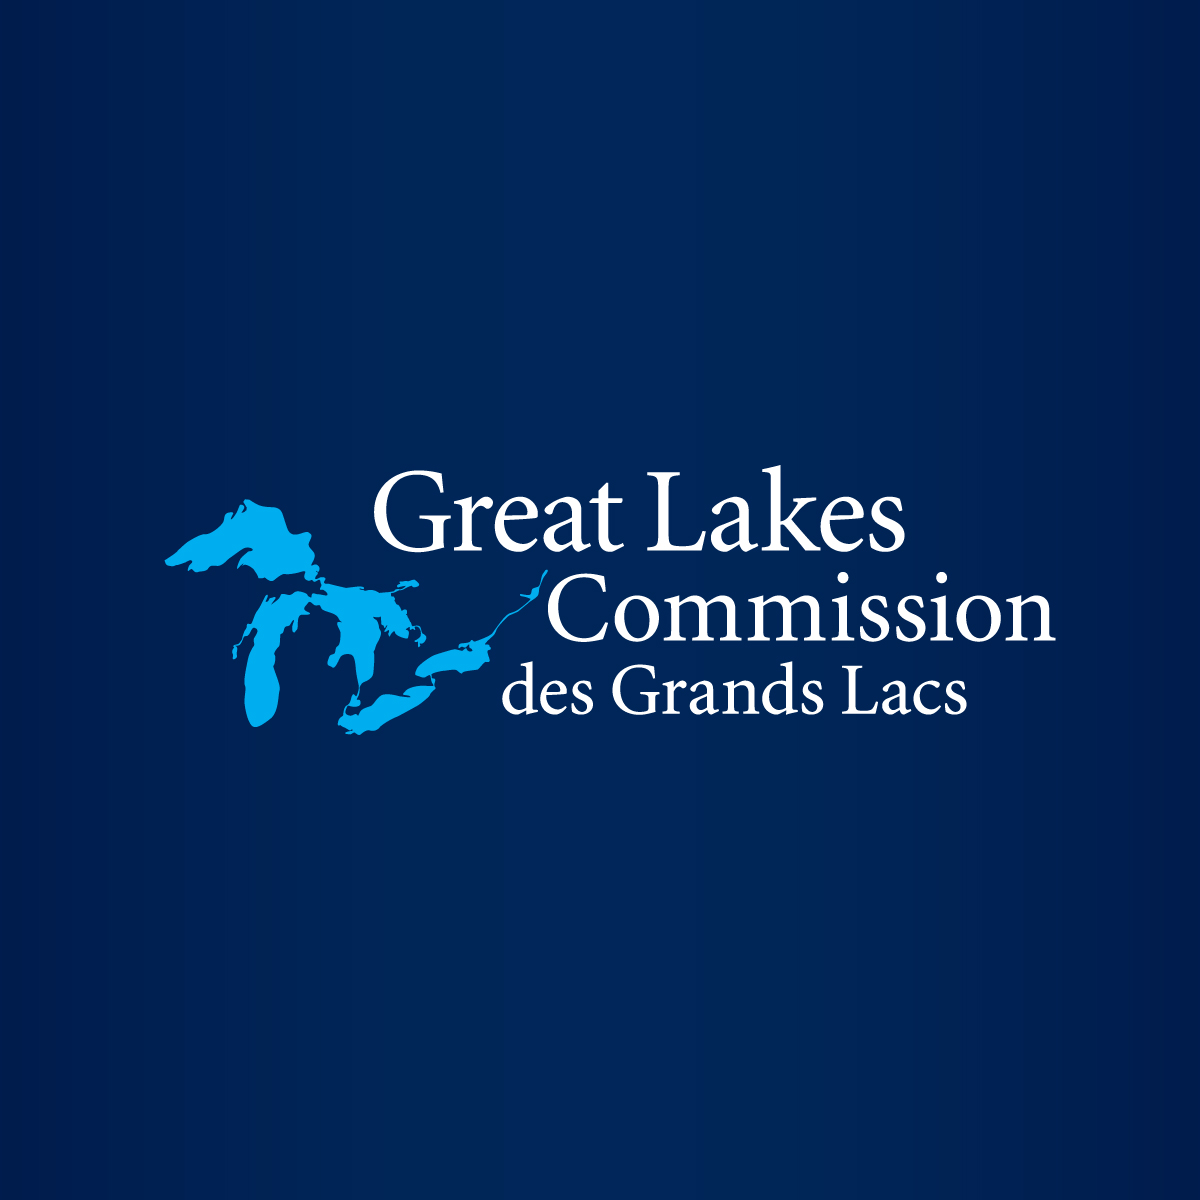 A mission to improve and protect the Great Lakes